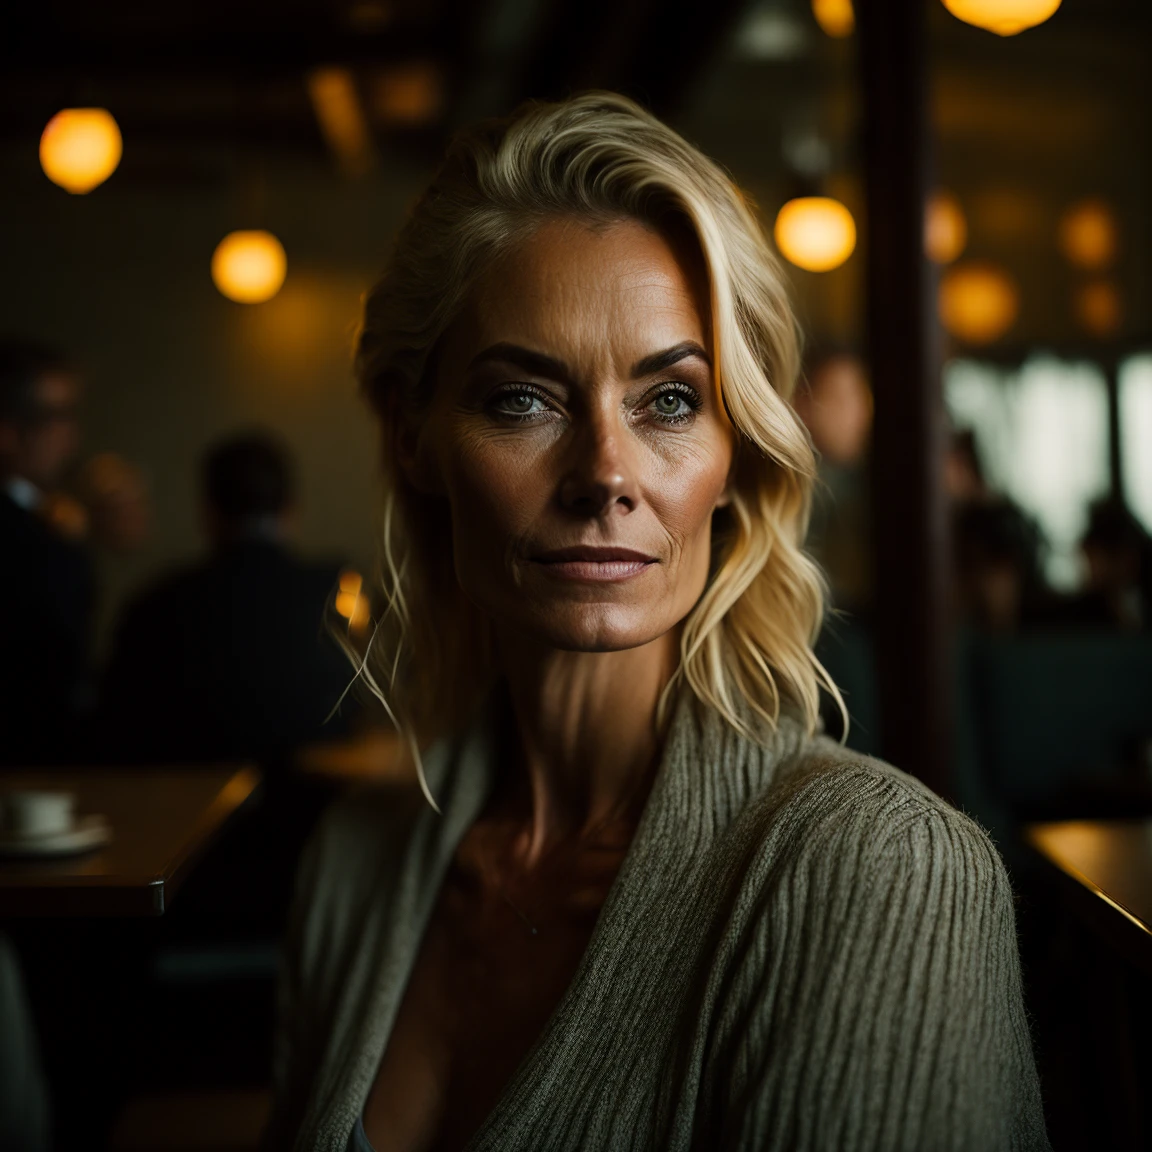 portrait o에프 a 40 year old blonde woman in a restaurant, clear 에프acial 에프eatures, 영화 같은, 35mm 렌즈, 에프/1.8, 악센트 조명, 전역 조명